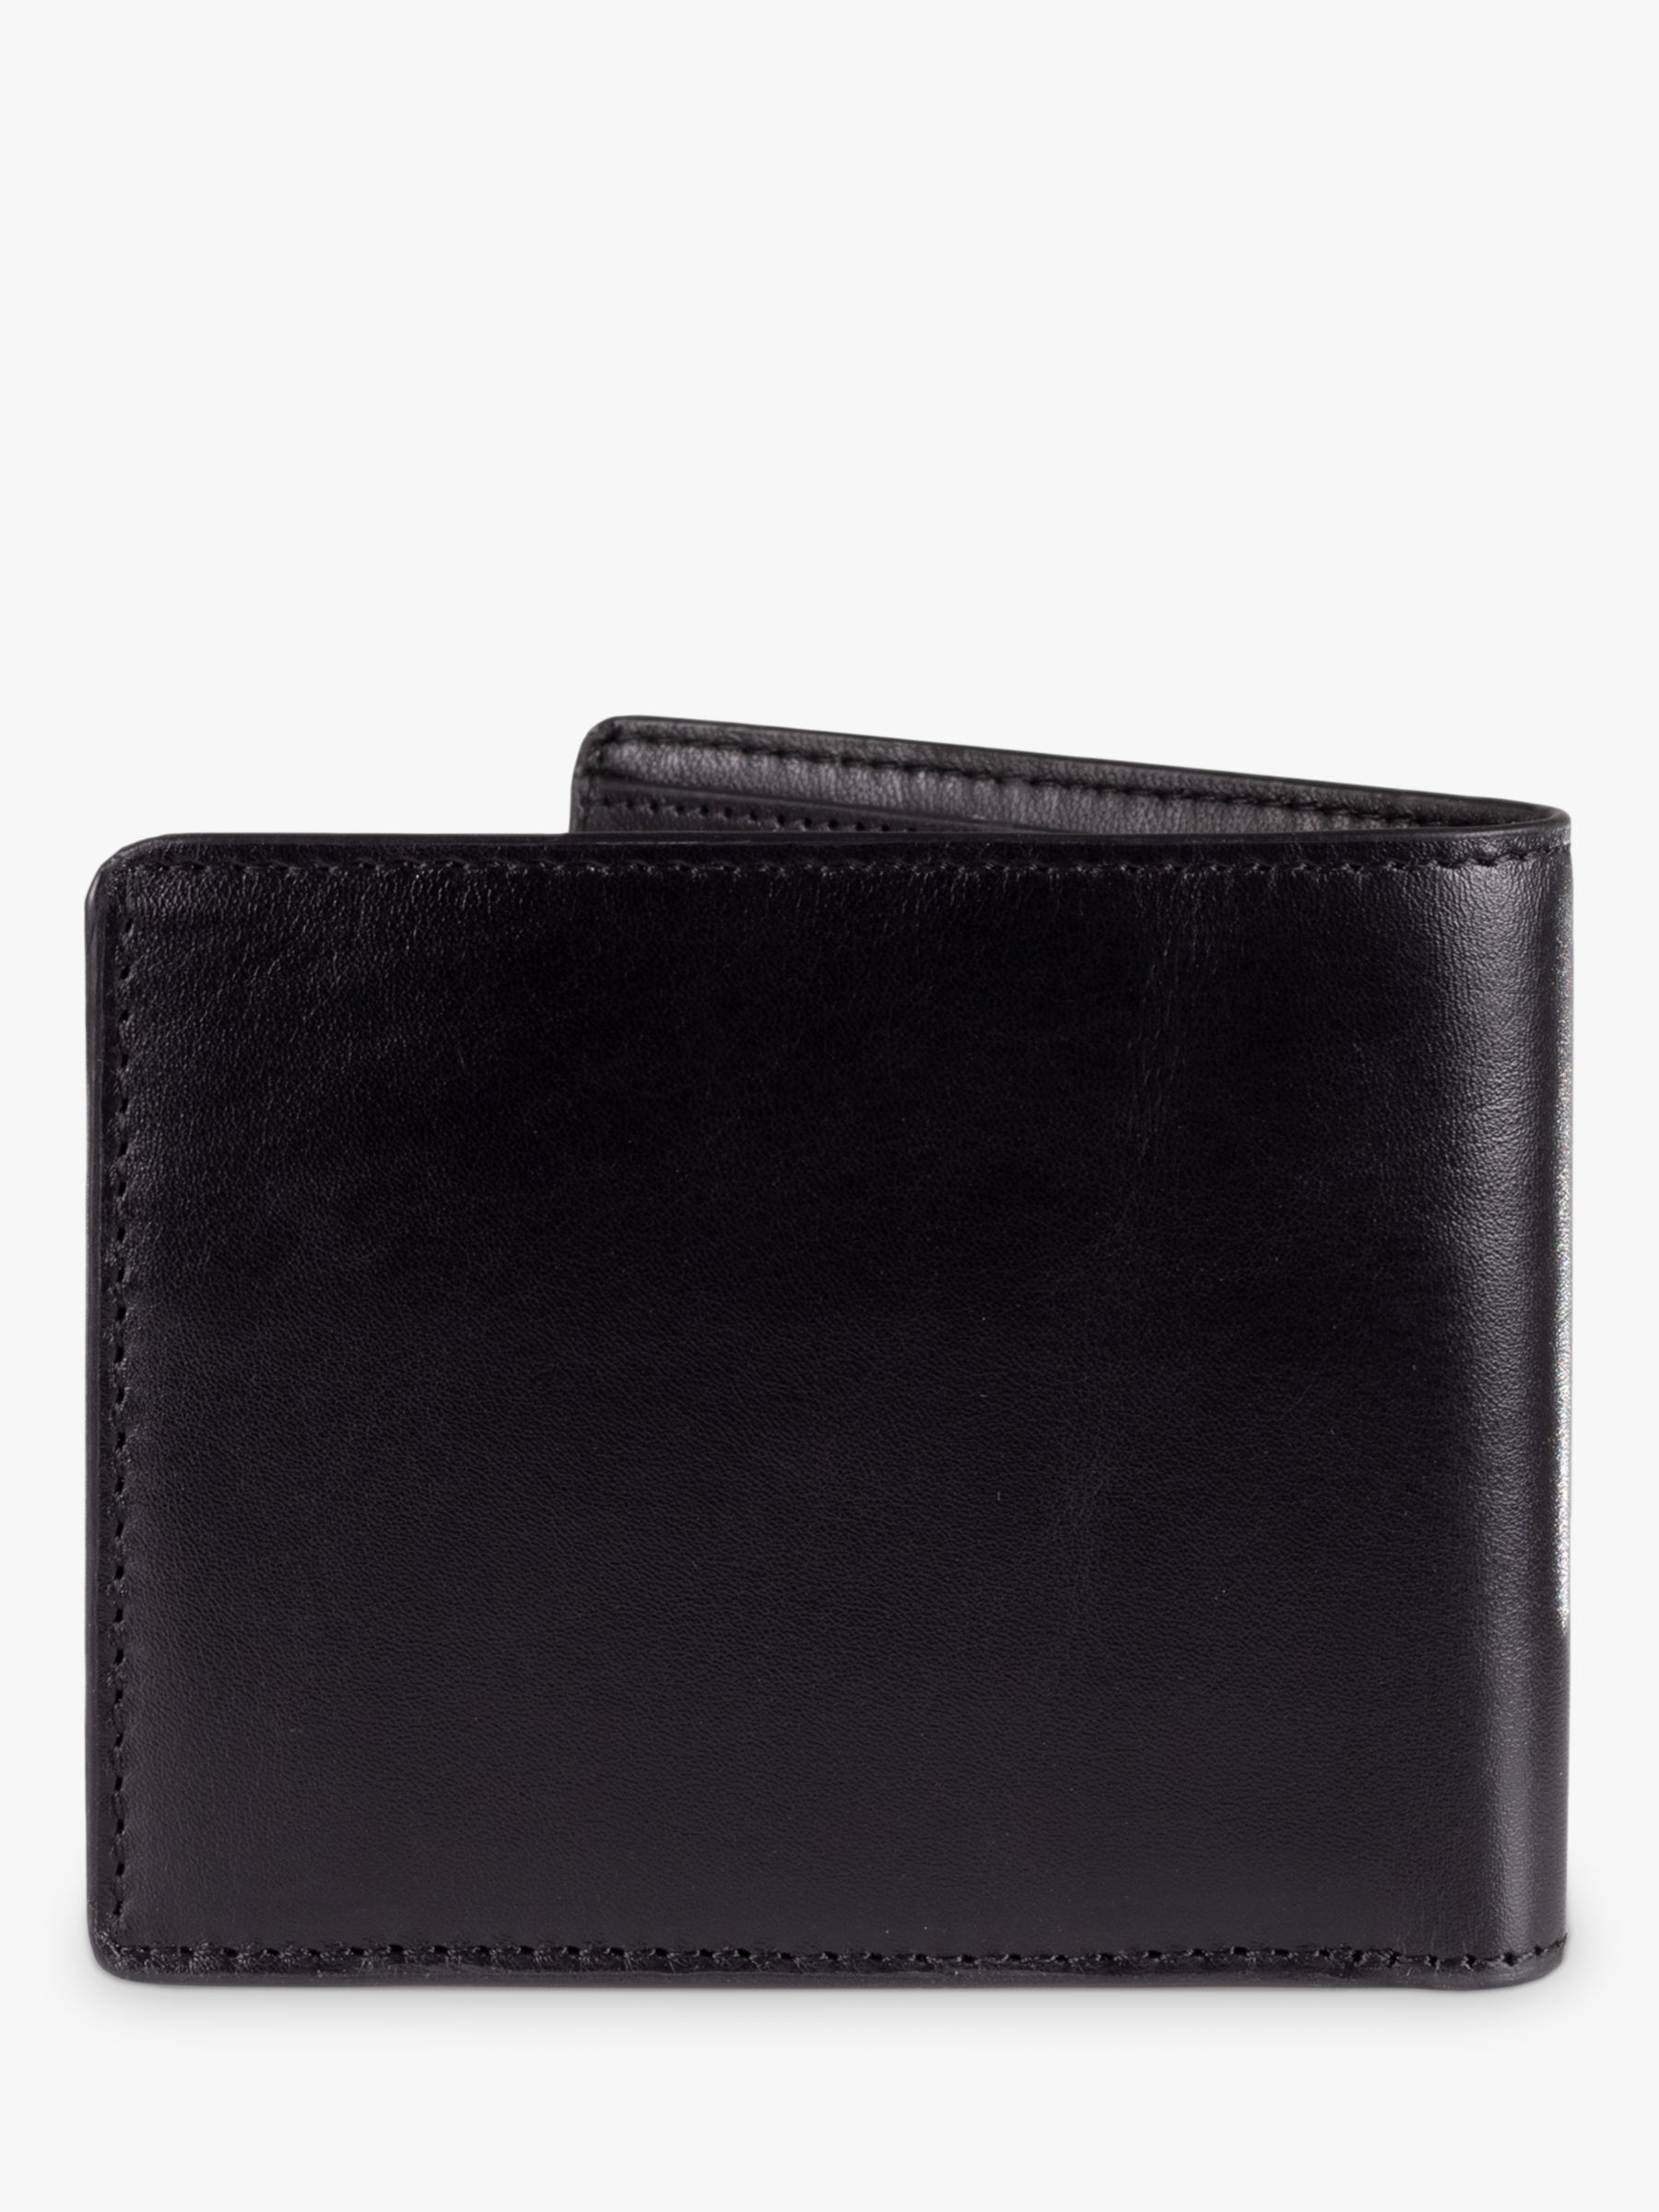 John Lewis Vegetable Tanned Leather Card Coin Bifold Wallet, Black at ...